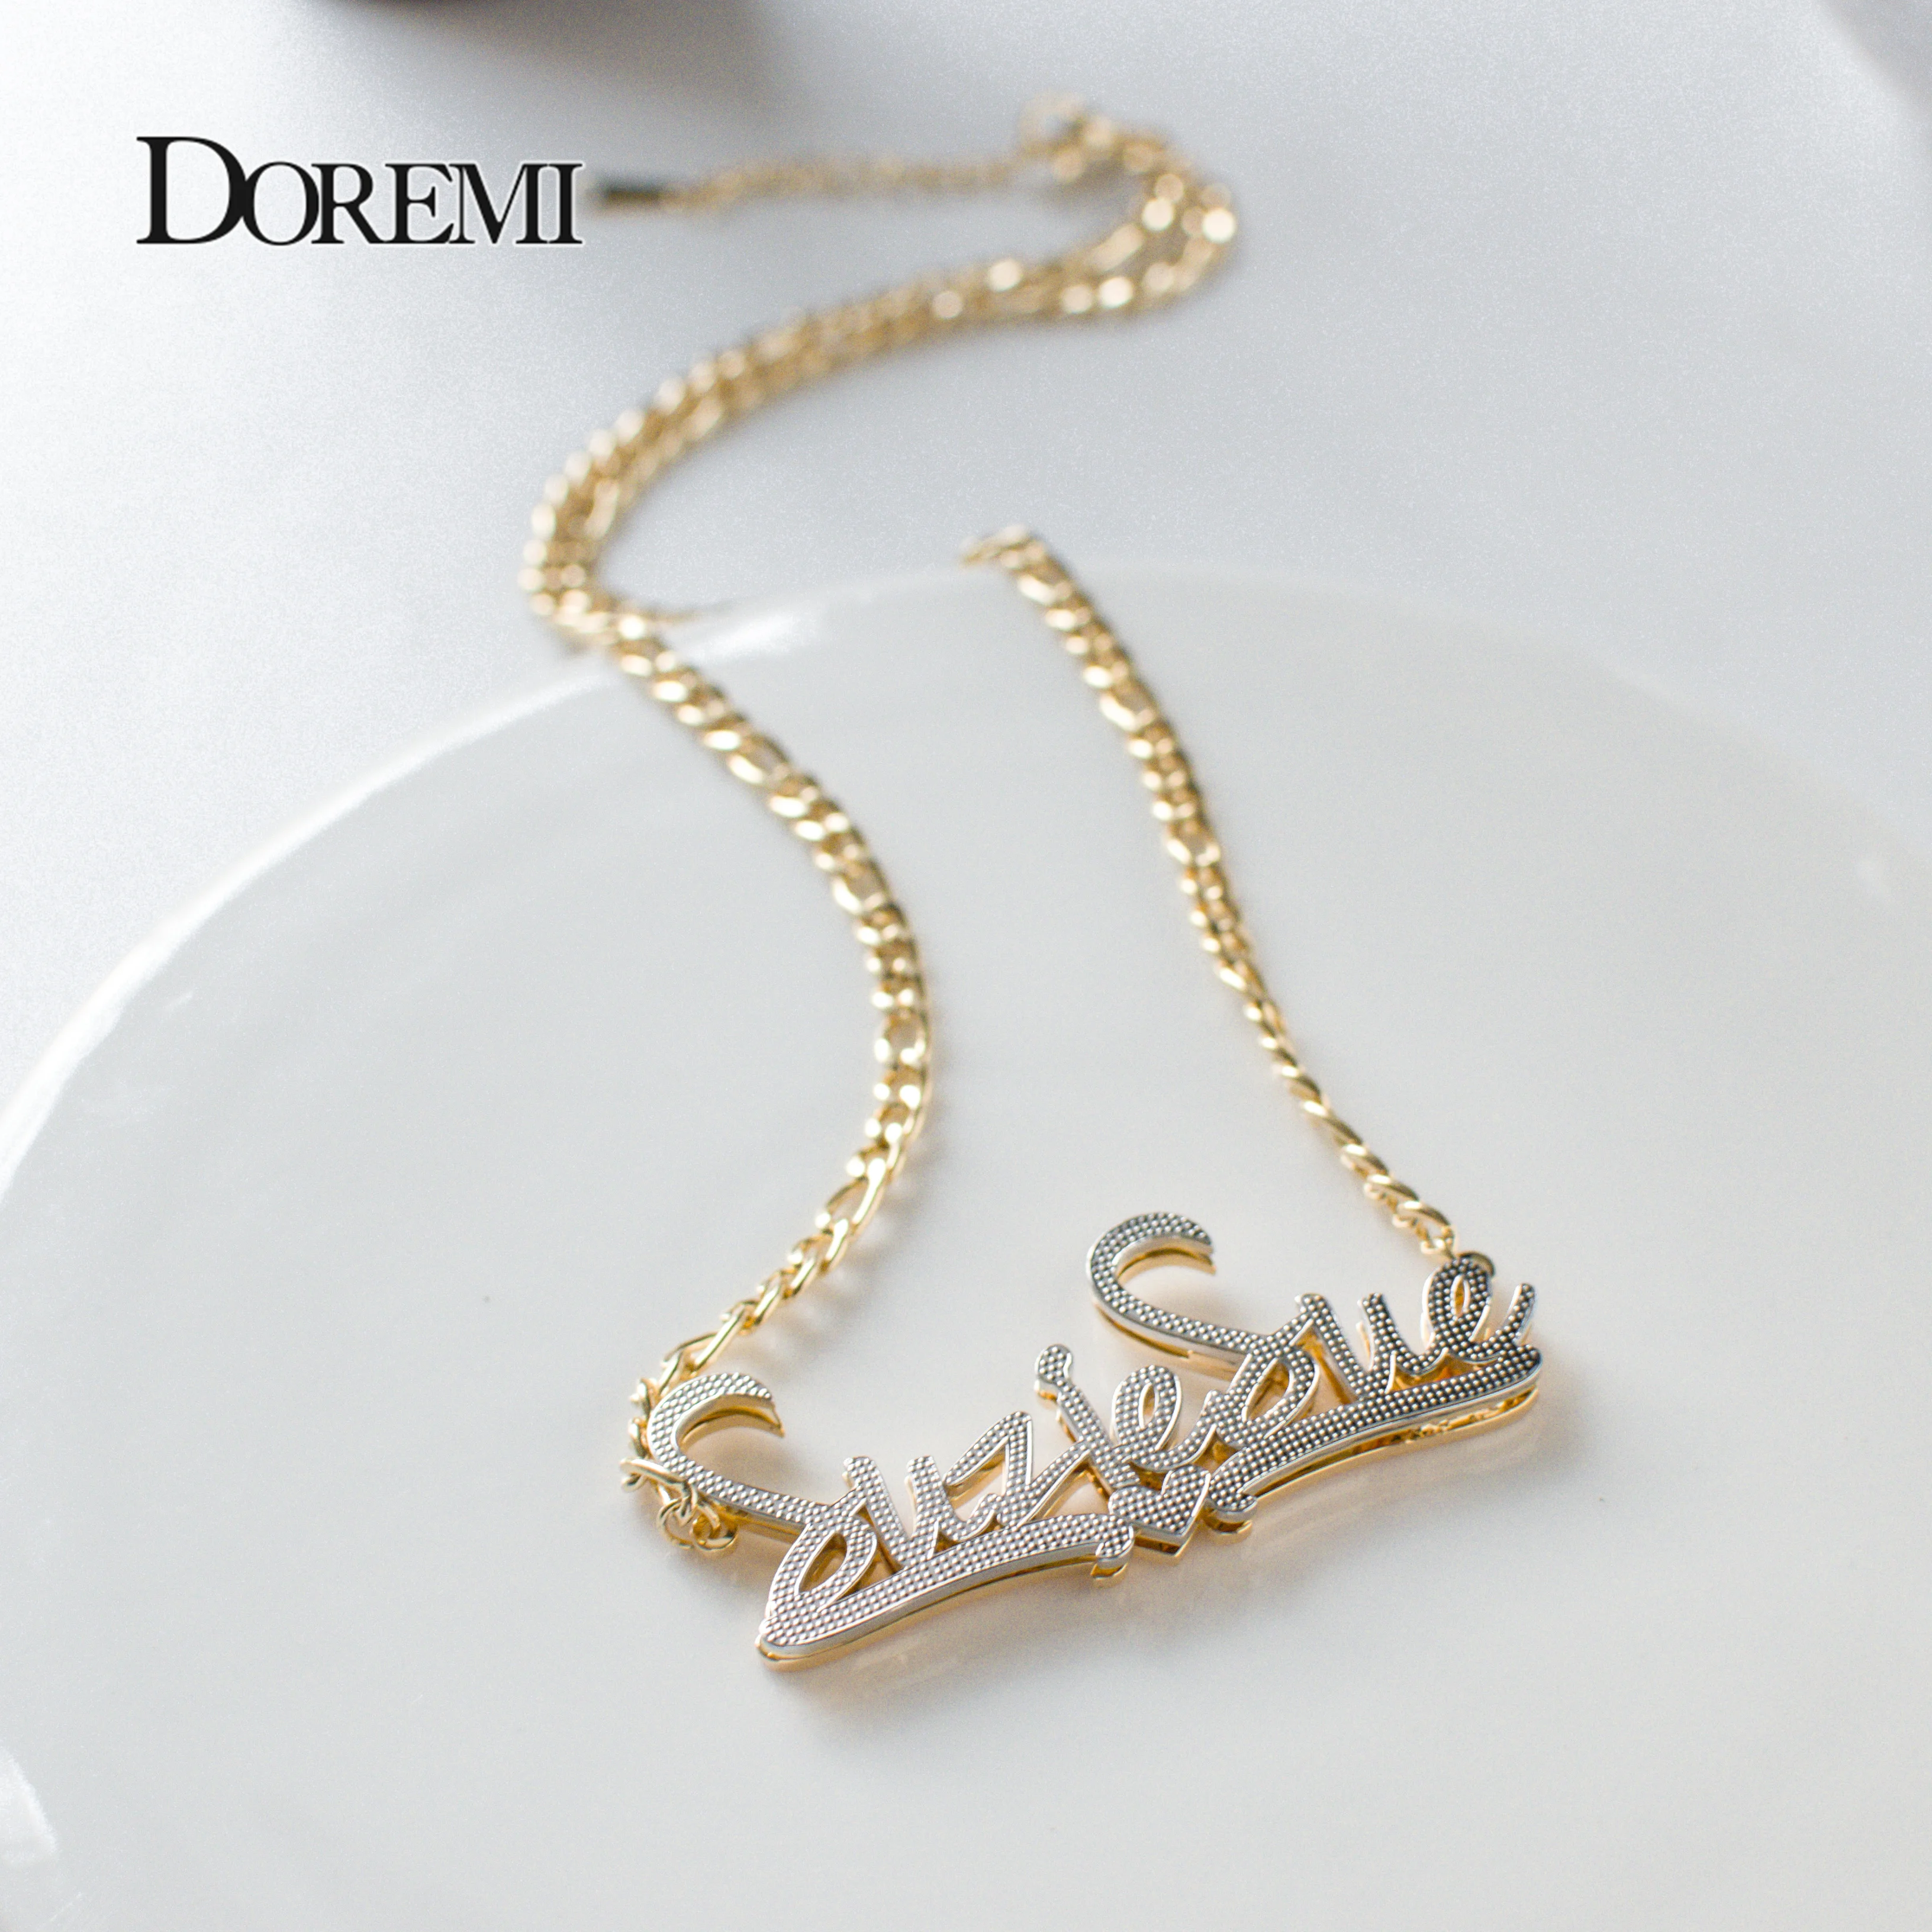 DOREMI 2 Toned 304 Stainless Name Necklace Heart Nameplate Personalized Pendant Double Layer Custom Jewelry Valentine's Day Gift valentine s mothers day custom photo projection necklace heart shaped projection picture necklace anniversary gifts jewelry